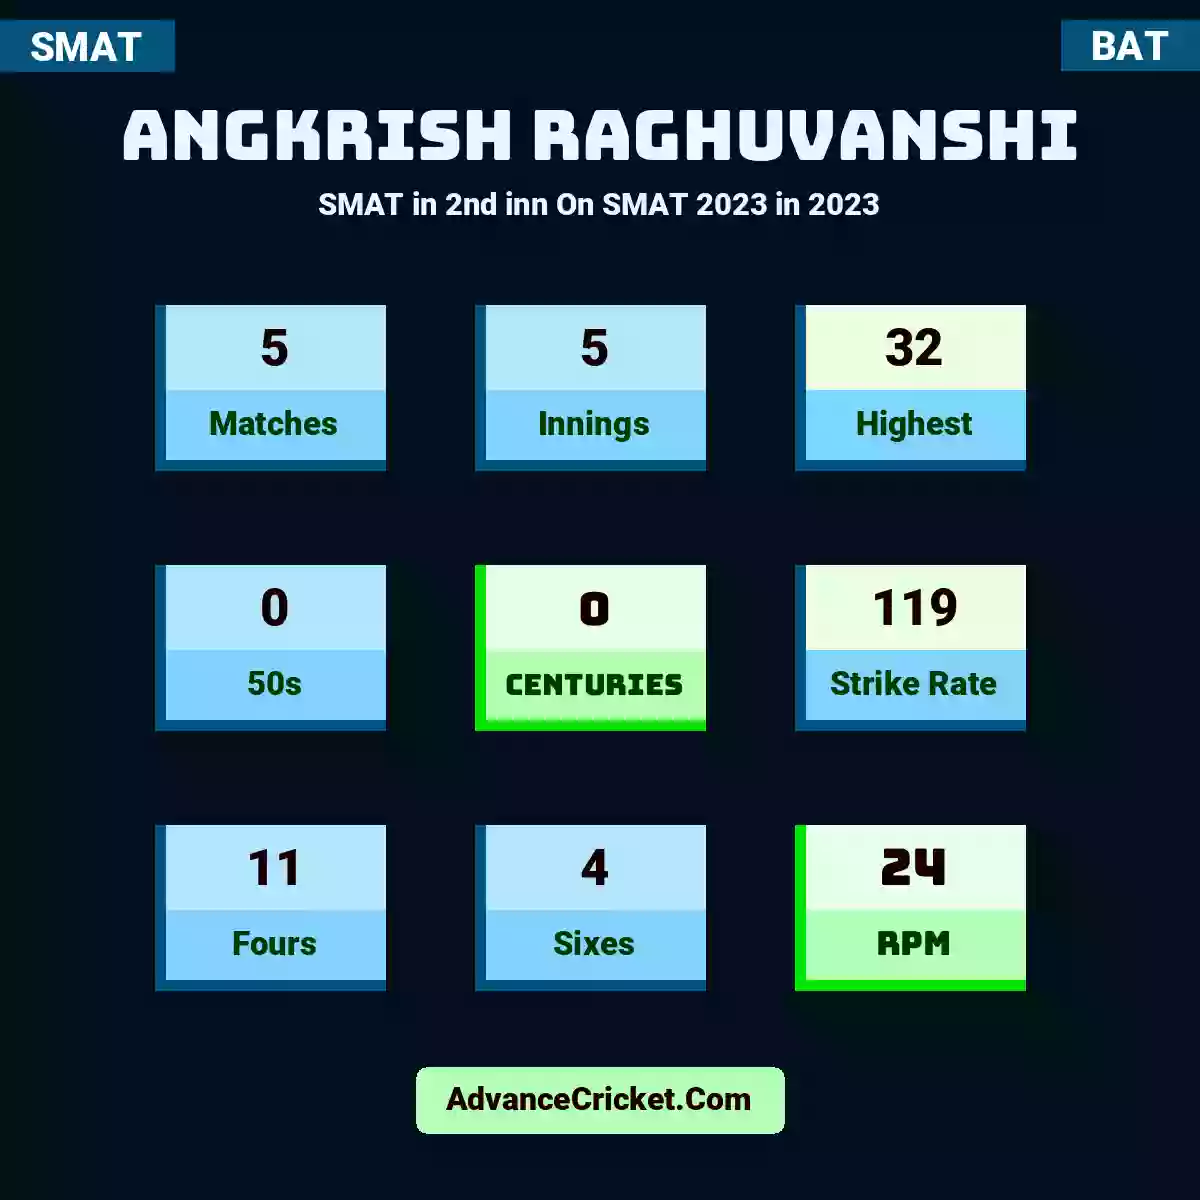 Angkrish Raghuvanshi SMAT  in 2nd inn On SMAT 2023 in 2023, Angkrish Raghuvanshi played 5 matches, scored 32 runs as highest, 0 half-centuries, and 0 centuries, with a strike rate of 119. A.Raghuvanshi hit 11 fours and 4 sixes, with an RPM of 24.